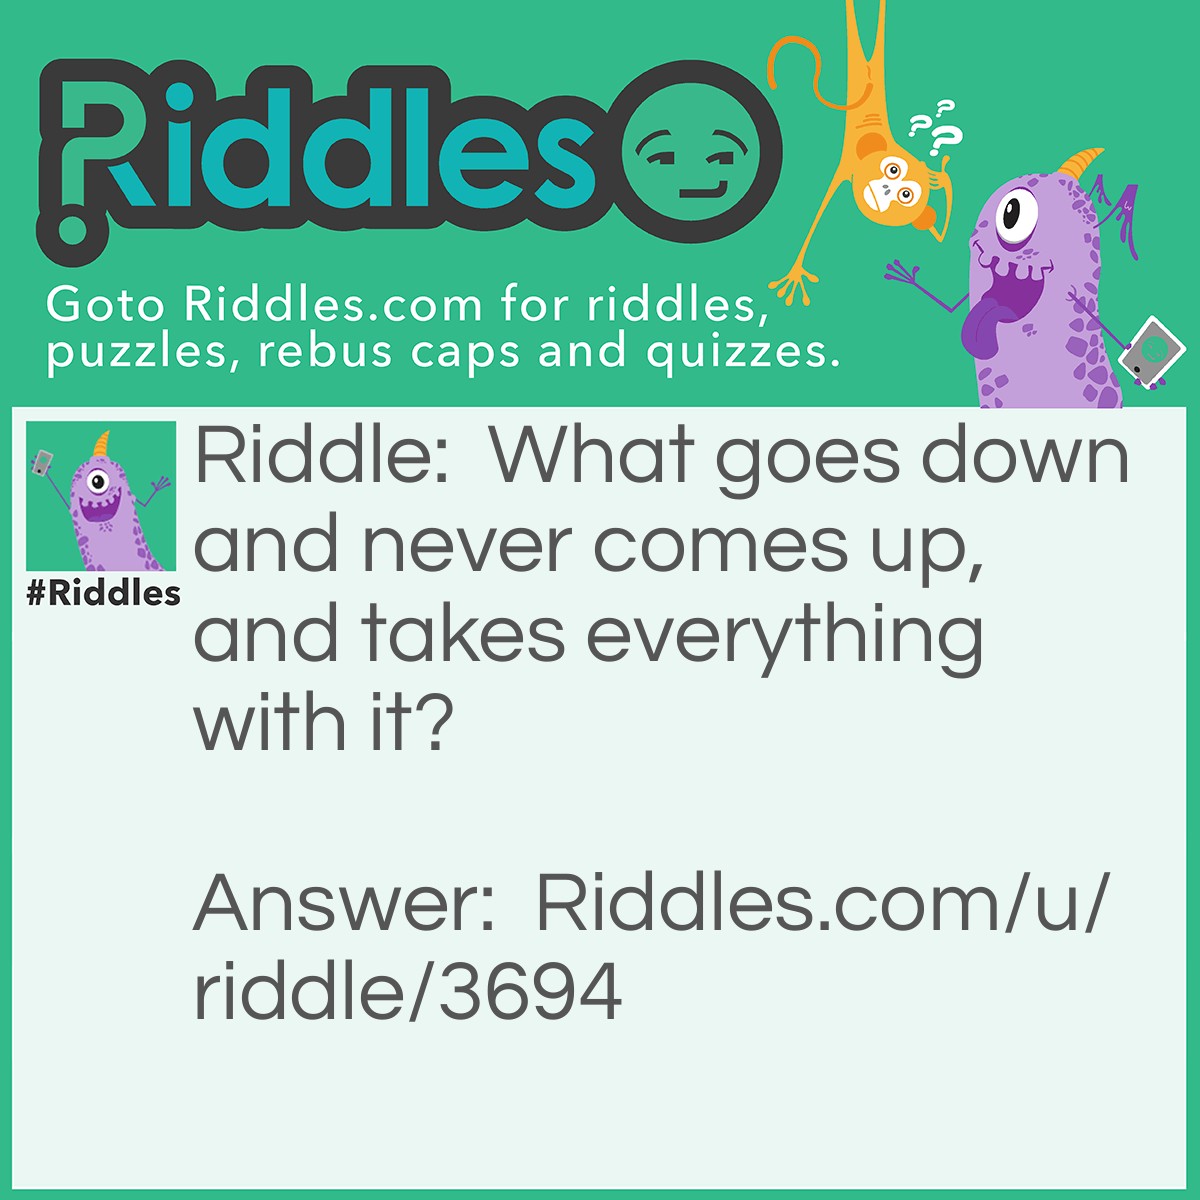 Riddle: What goes down and never comes up, and takes everything with it? Answer: Gravity.